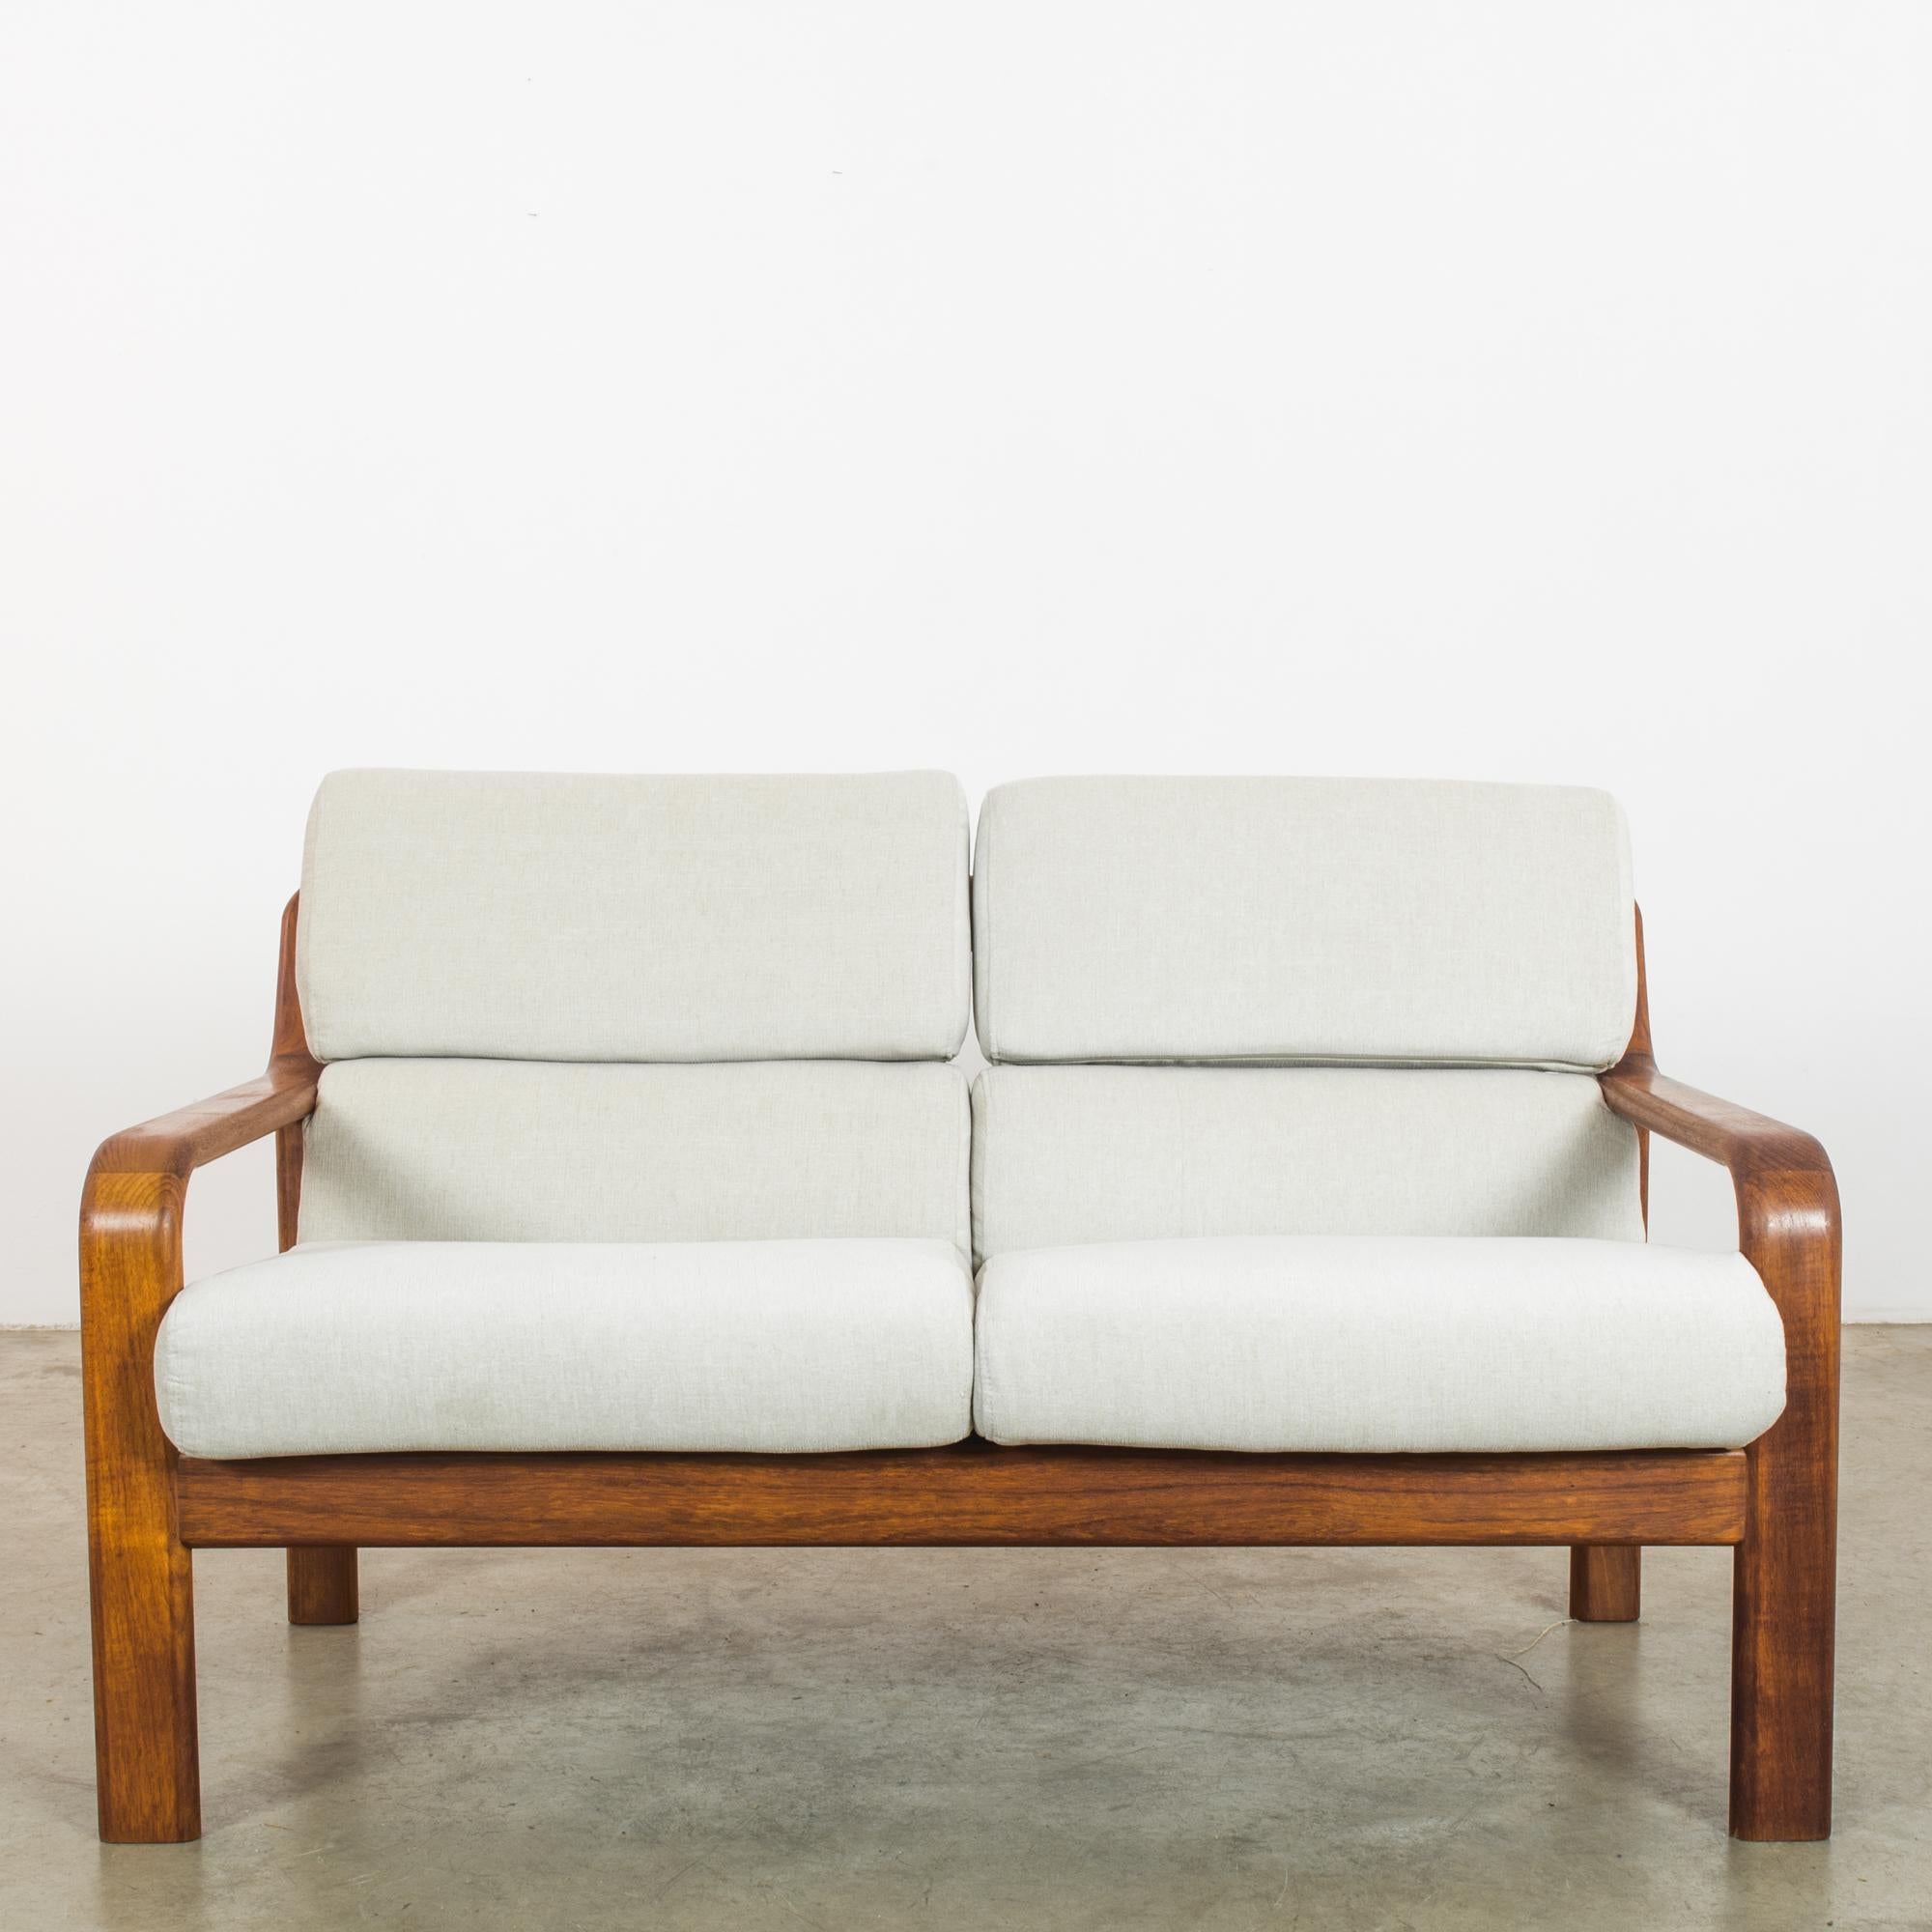 Discover mid-century charm with this 1960s Danish teak sofa, designed to elevate your living space with its timeless elegance. Crafted from rich, honey-toned teak wood, the frame showcases a fine grain that speaks to its high-quality heritage. The